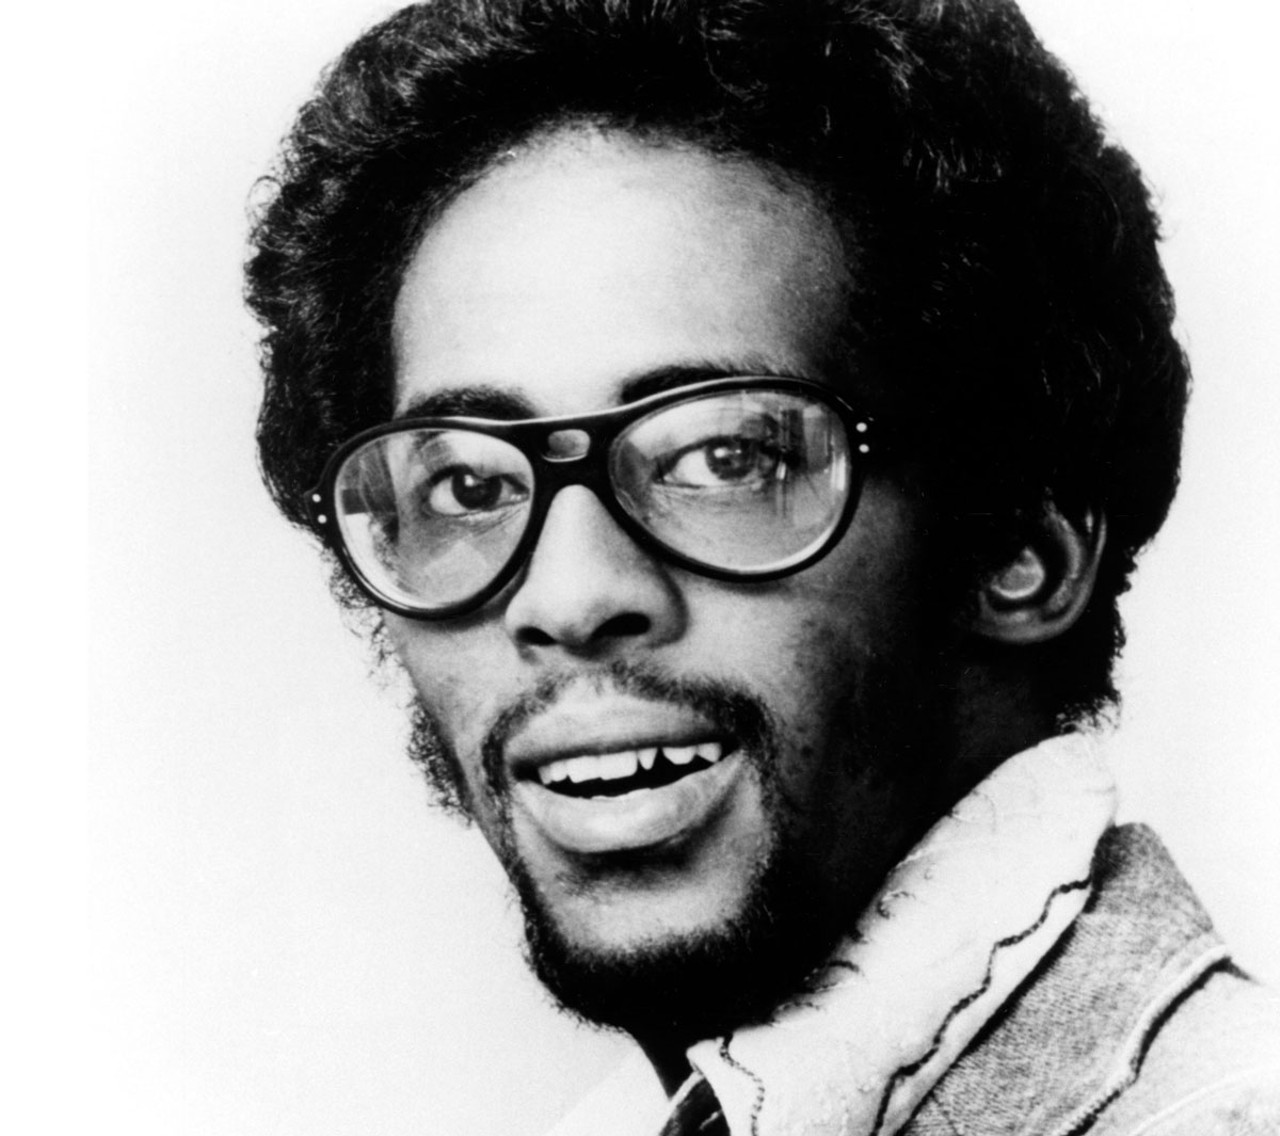 David Ruffin 
Inducted into the Rock and Roll Hall of Fame as a lead singer of The Temptations, David Ruffin's soulful voice defined hits like “My Girl” and “Ain’t Too Proud to Beg.” Following his 1991 passing, Ruffin was buried in Detroit’s Woodlawn Cemetery.